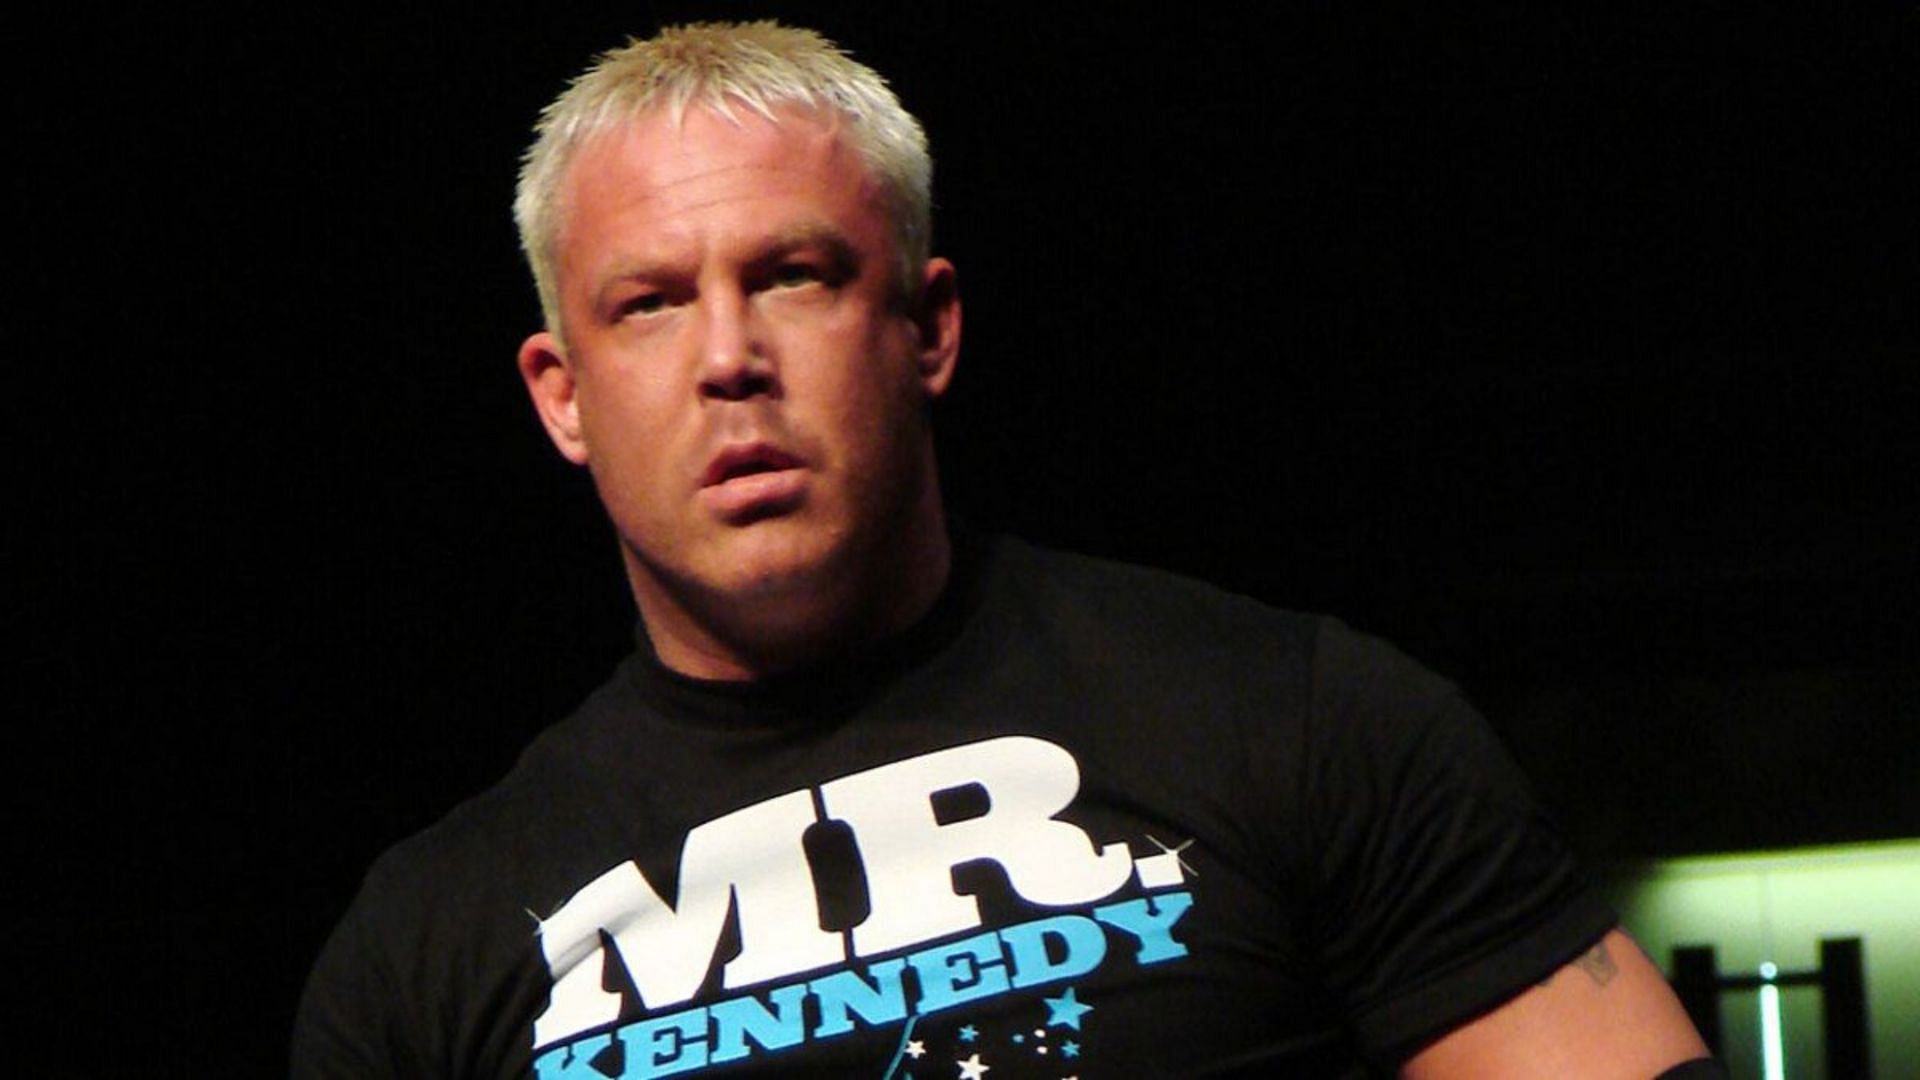 Ken Anderson was attracted to Stephanie McMahon